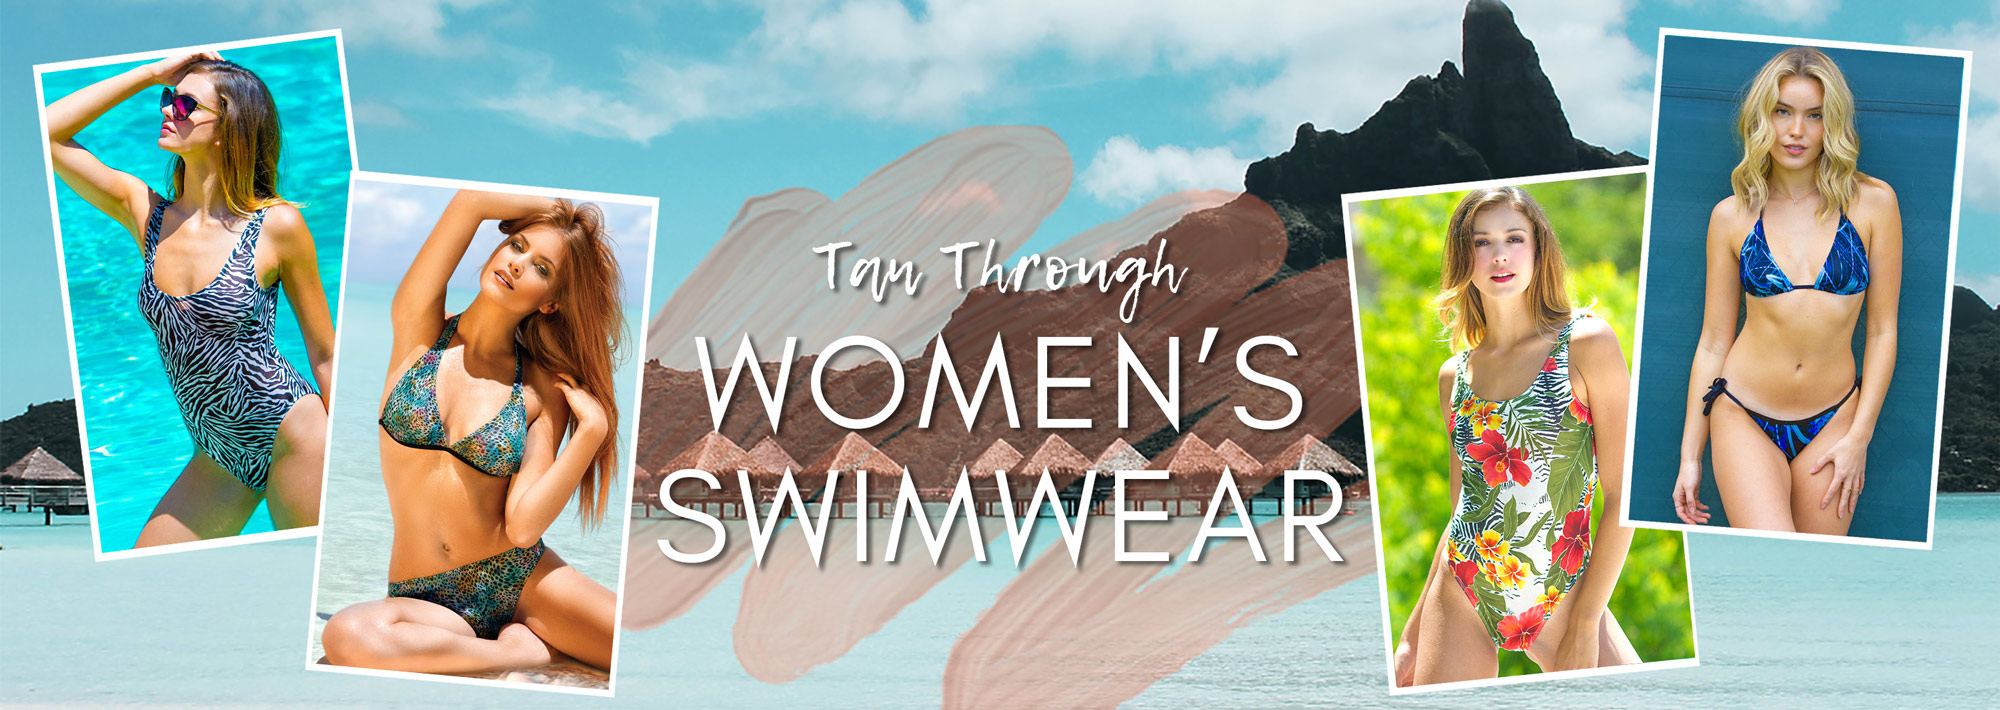 Women's One-piece suits